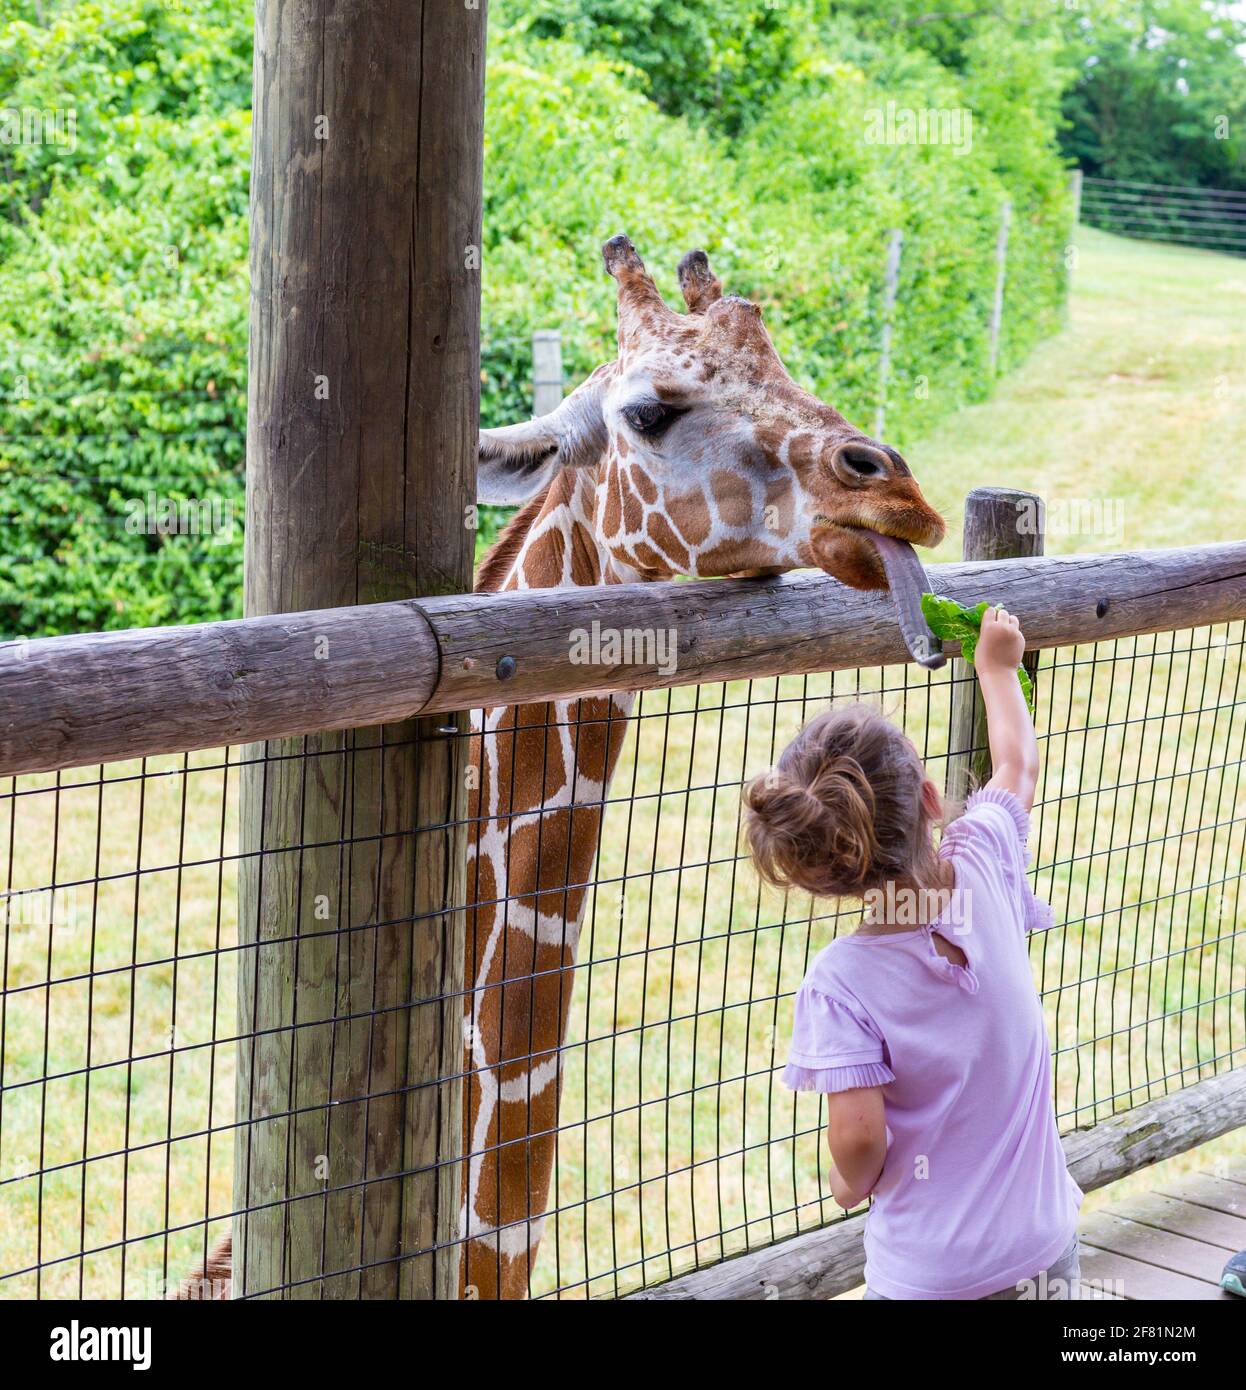 A young girl feeds a piece of lettuce to a hungry giraffe at the Fort Wayne Children's Zoo. Stock Photo